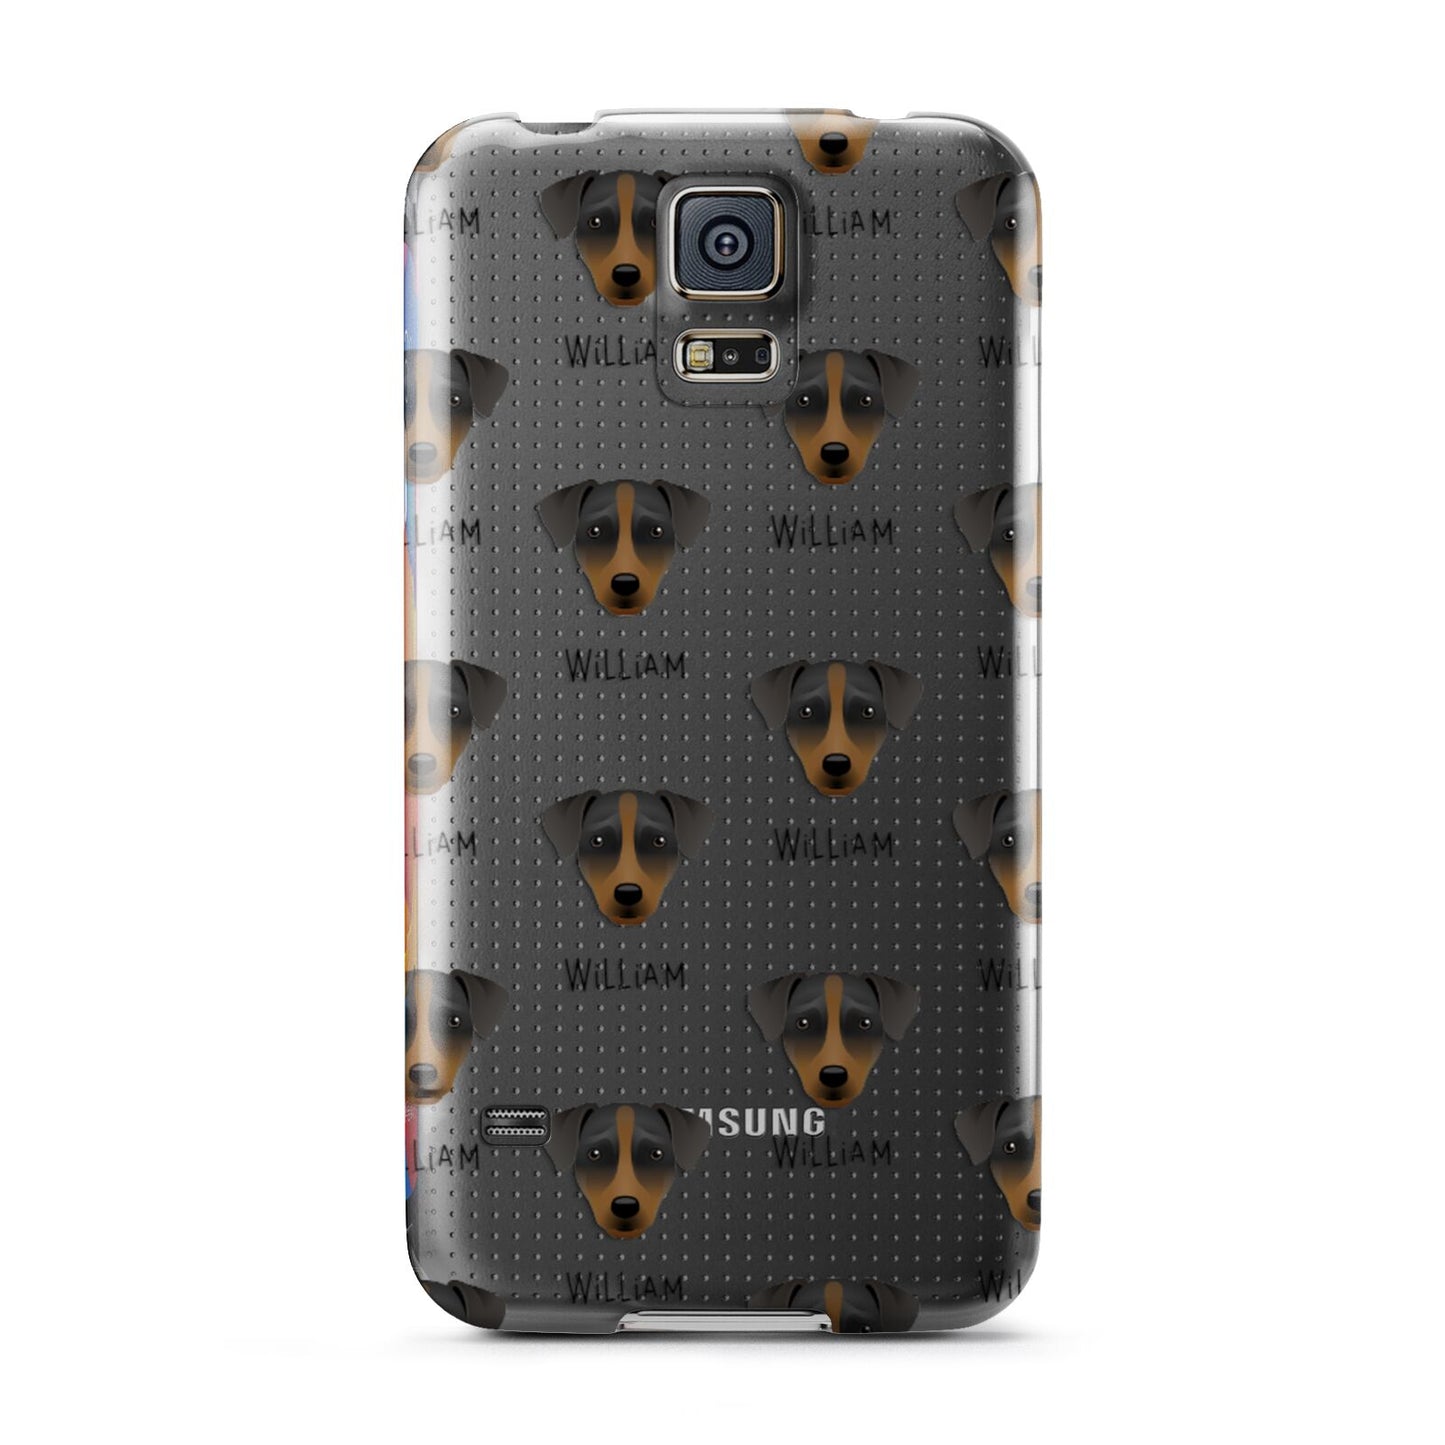 Patterdale Terrier Icon with Name Samsung Galaxy S5 Case